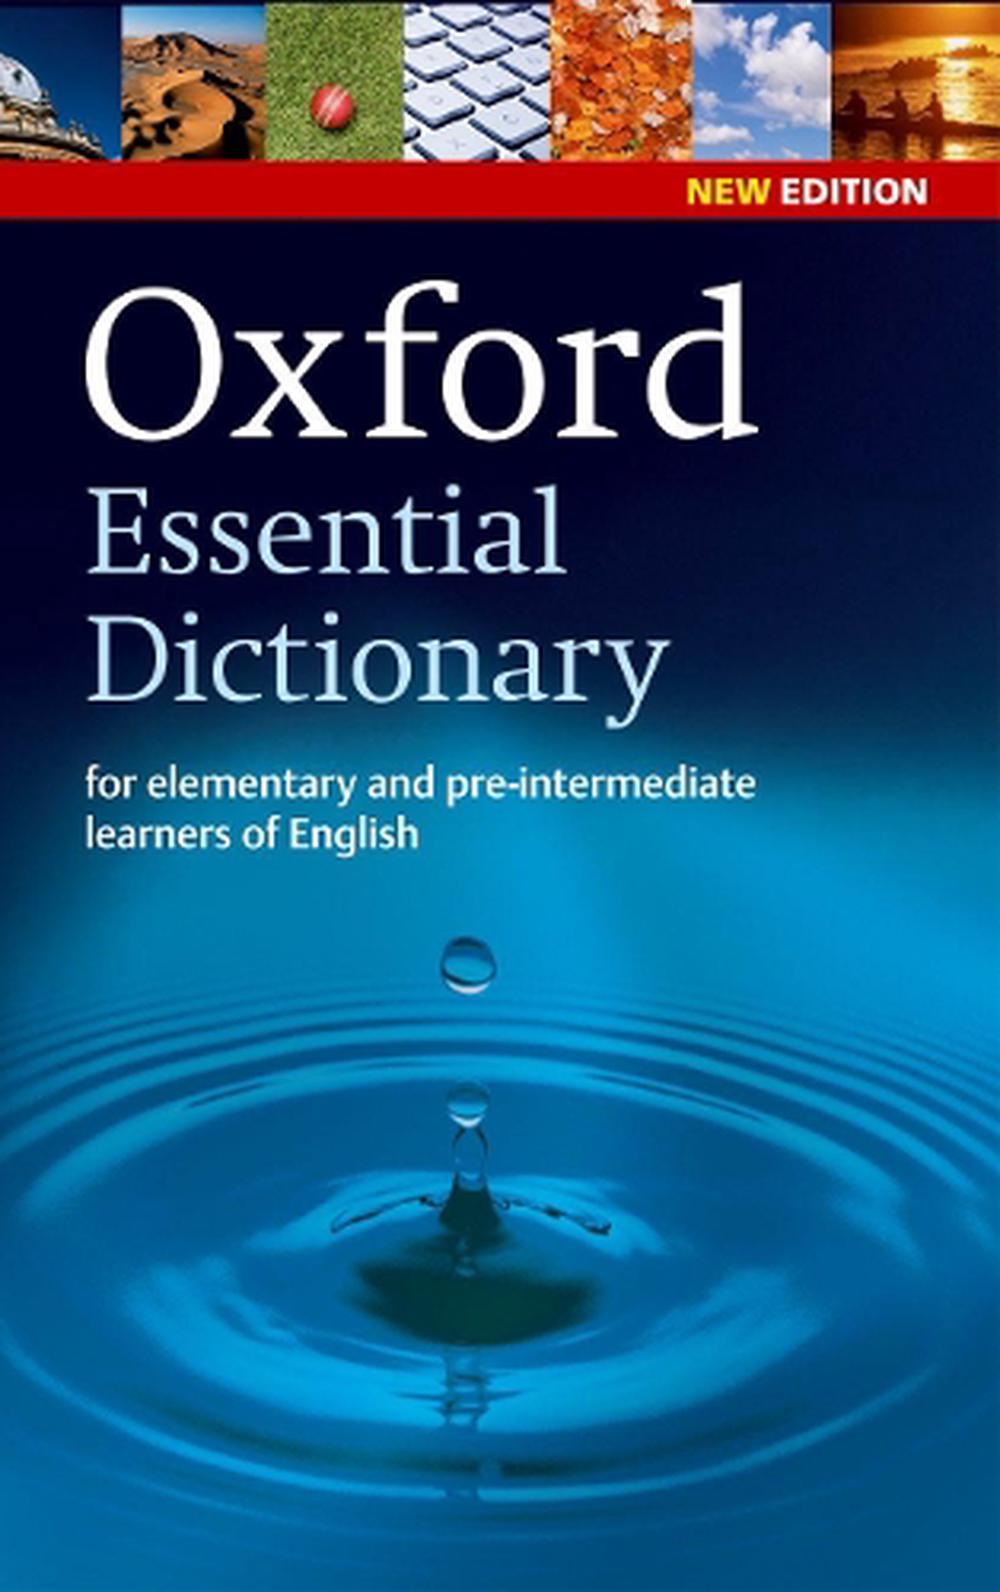 homework meaning oxford dictionary